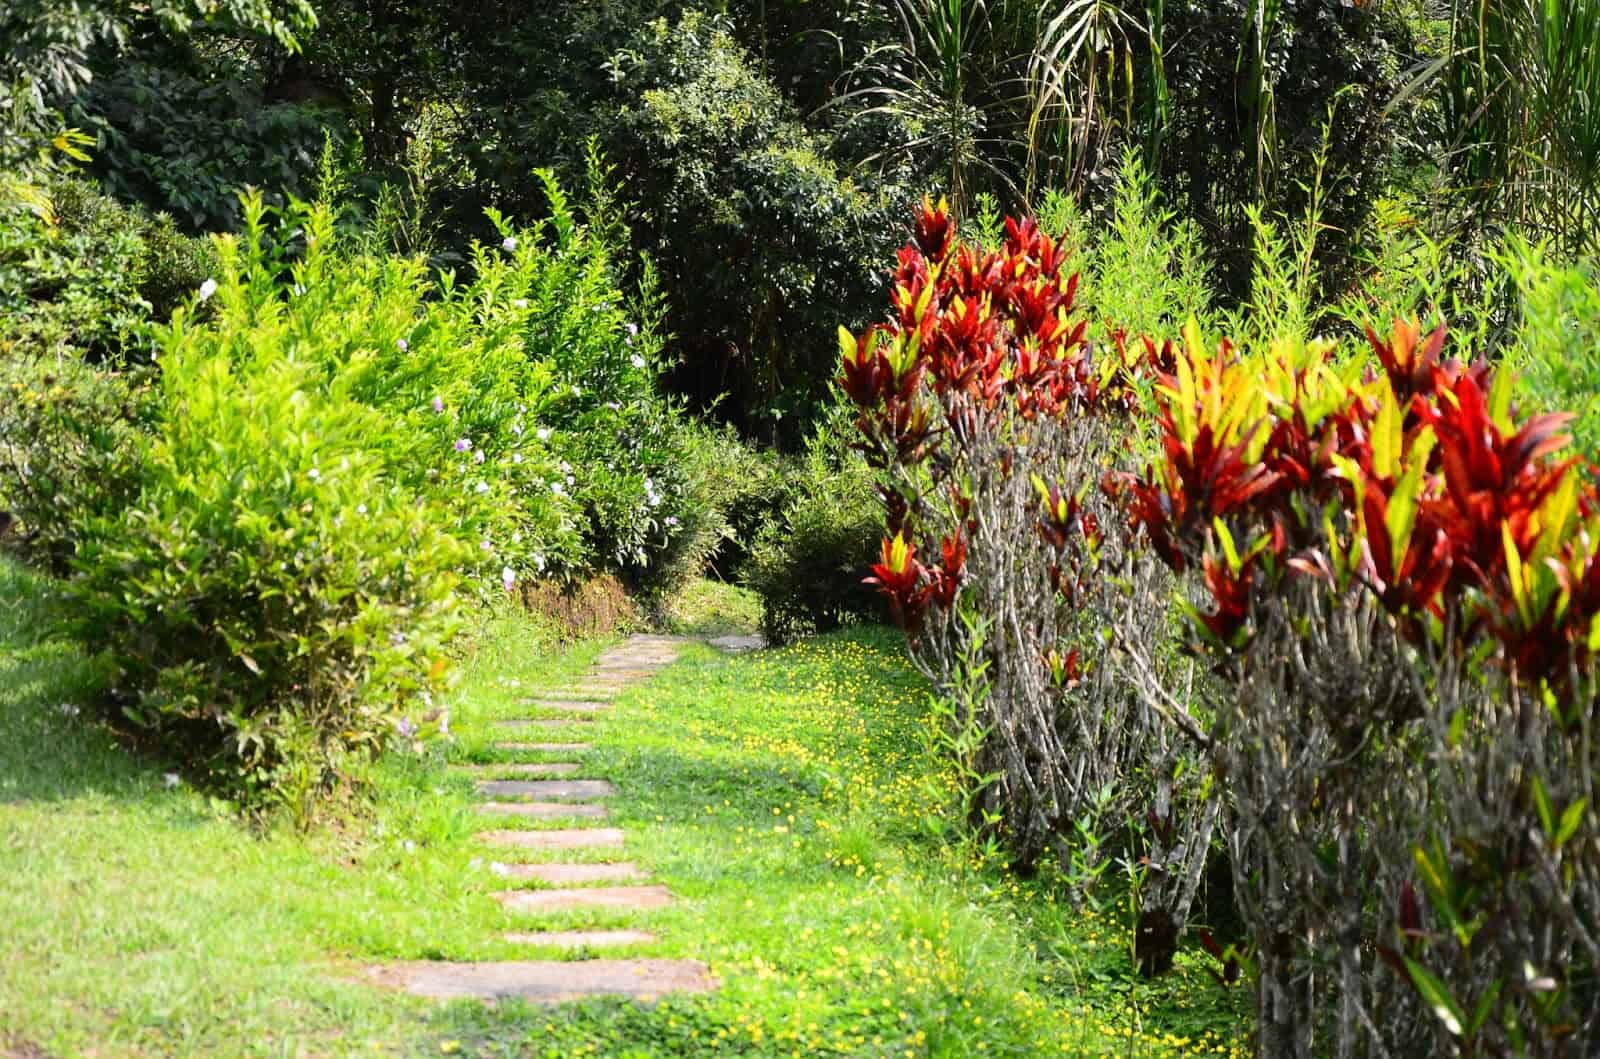 A path through San Jorge Botanical Garden in Ibagué, Tolima, Colombia